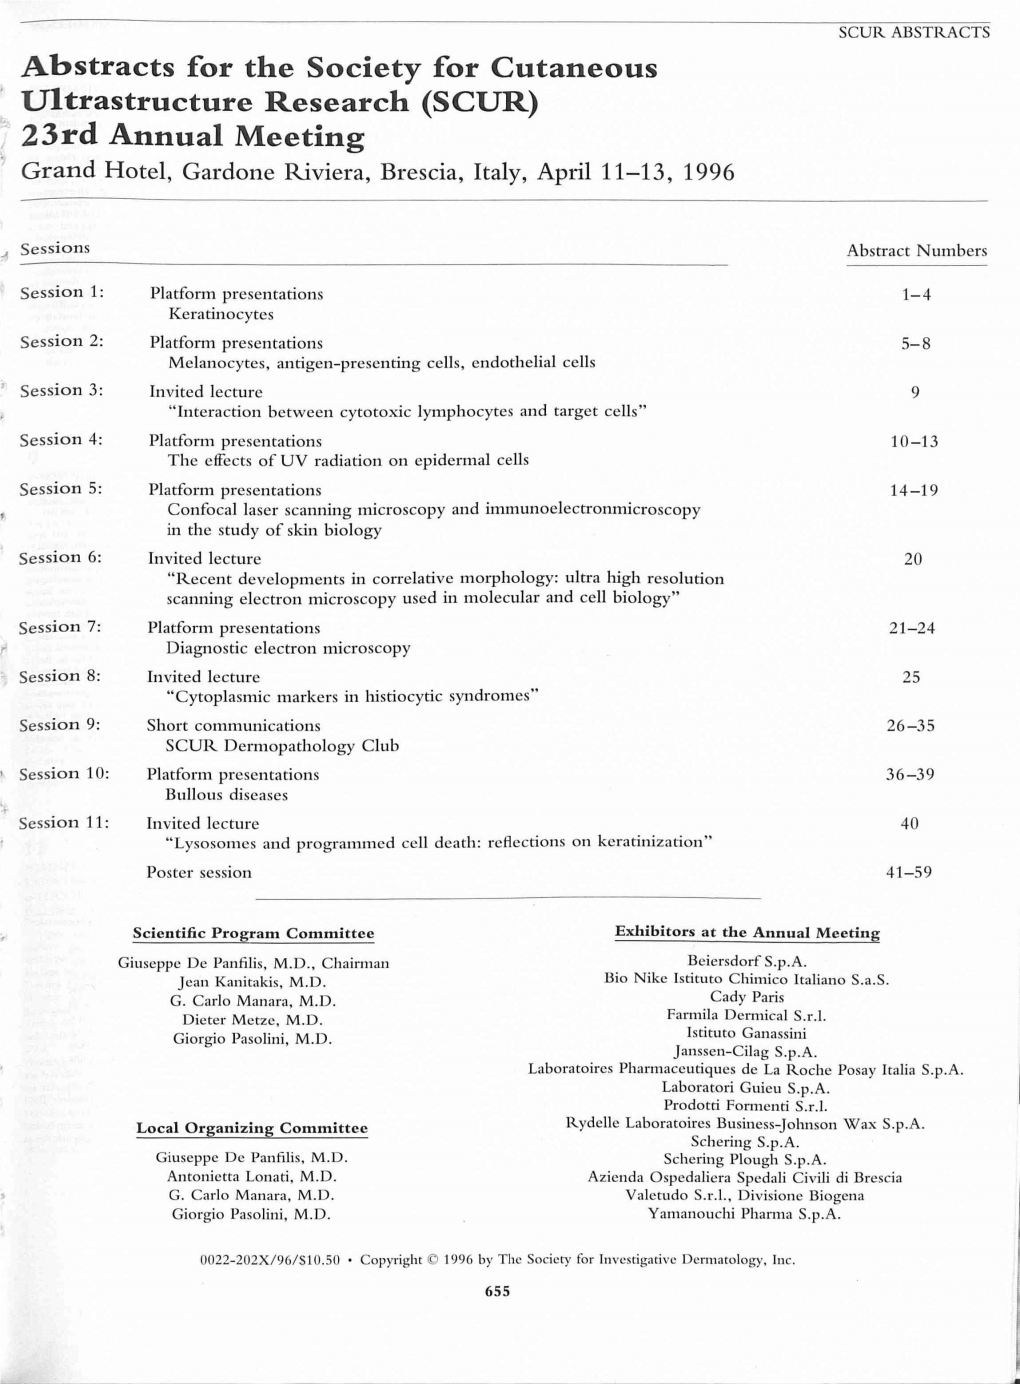 Abstracts for the Society for Cutaneous Ultrastructure Research (SCUR) 23Rd Annual Meeting Grand Hotel, Gardone Riviera, Brescia, Italy, April 11-13, 1996